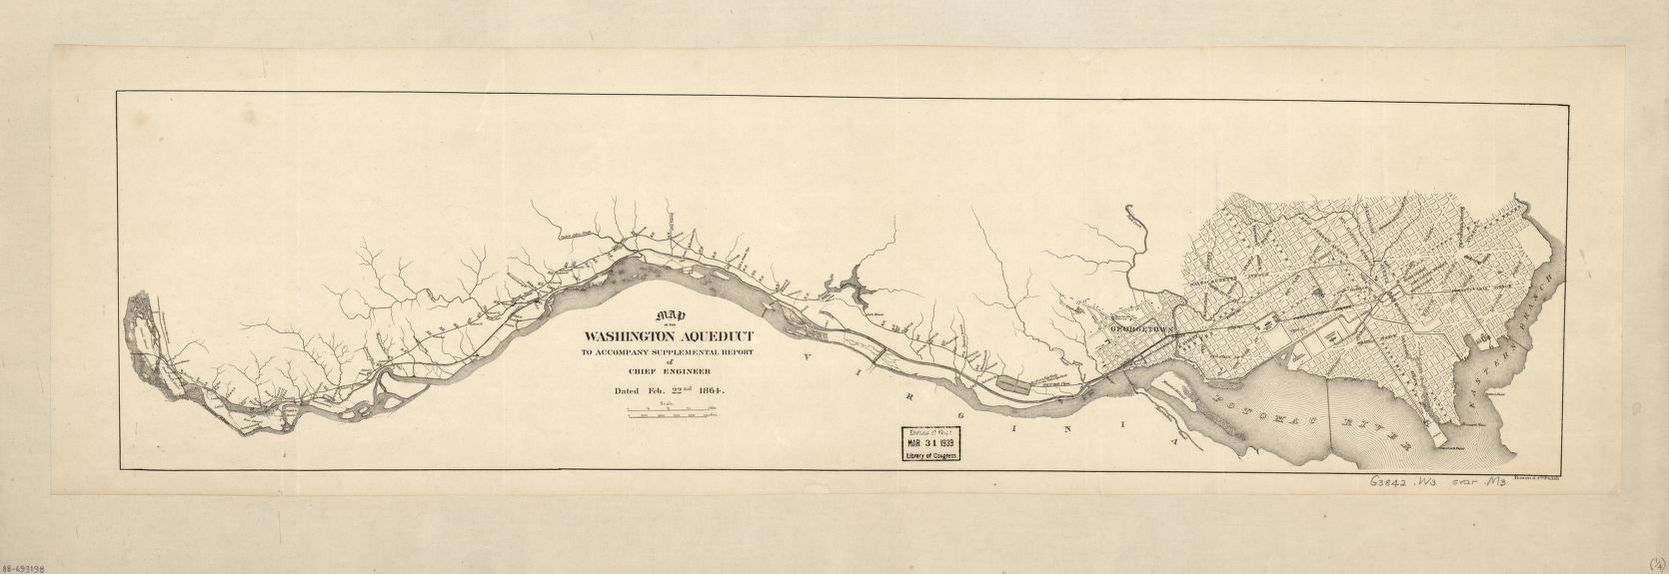 Map of the Washington Aqueduct. (Courtesy of The Library of Congress)